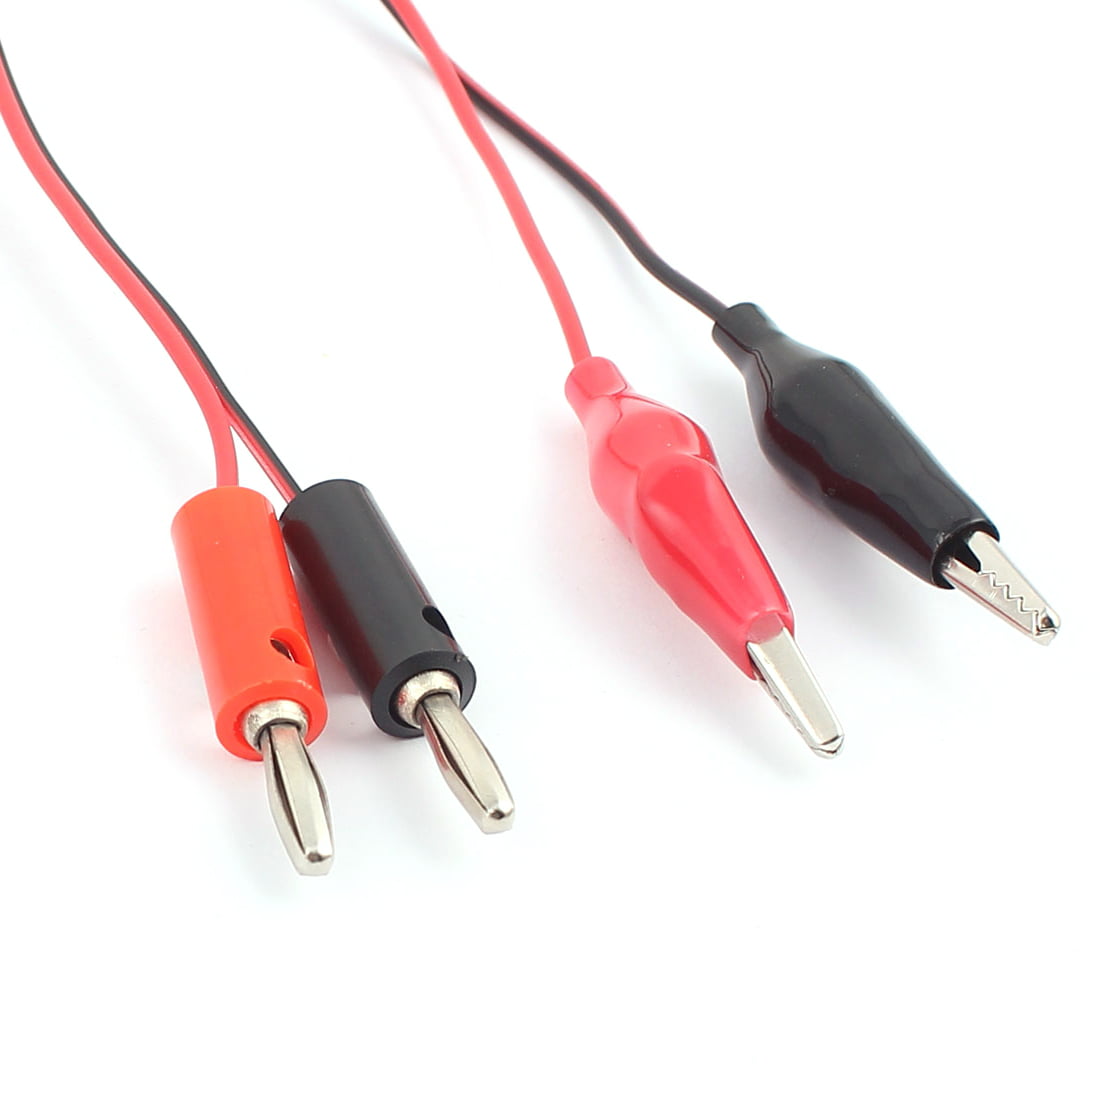 2x Black Red Banana Plug to Alligator Power Supply Test Clip Cable Lead 1m 32a for sale online 